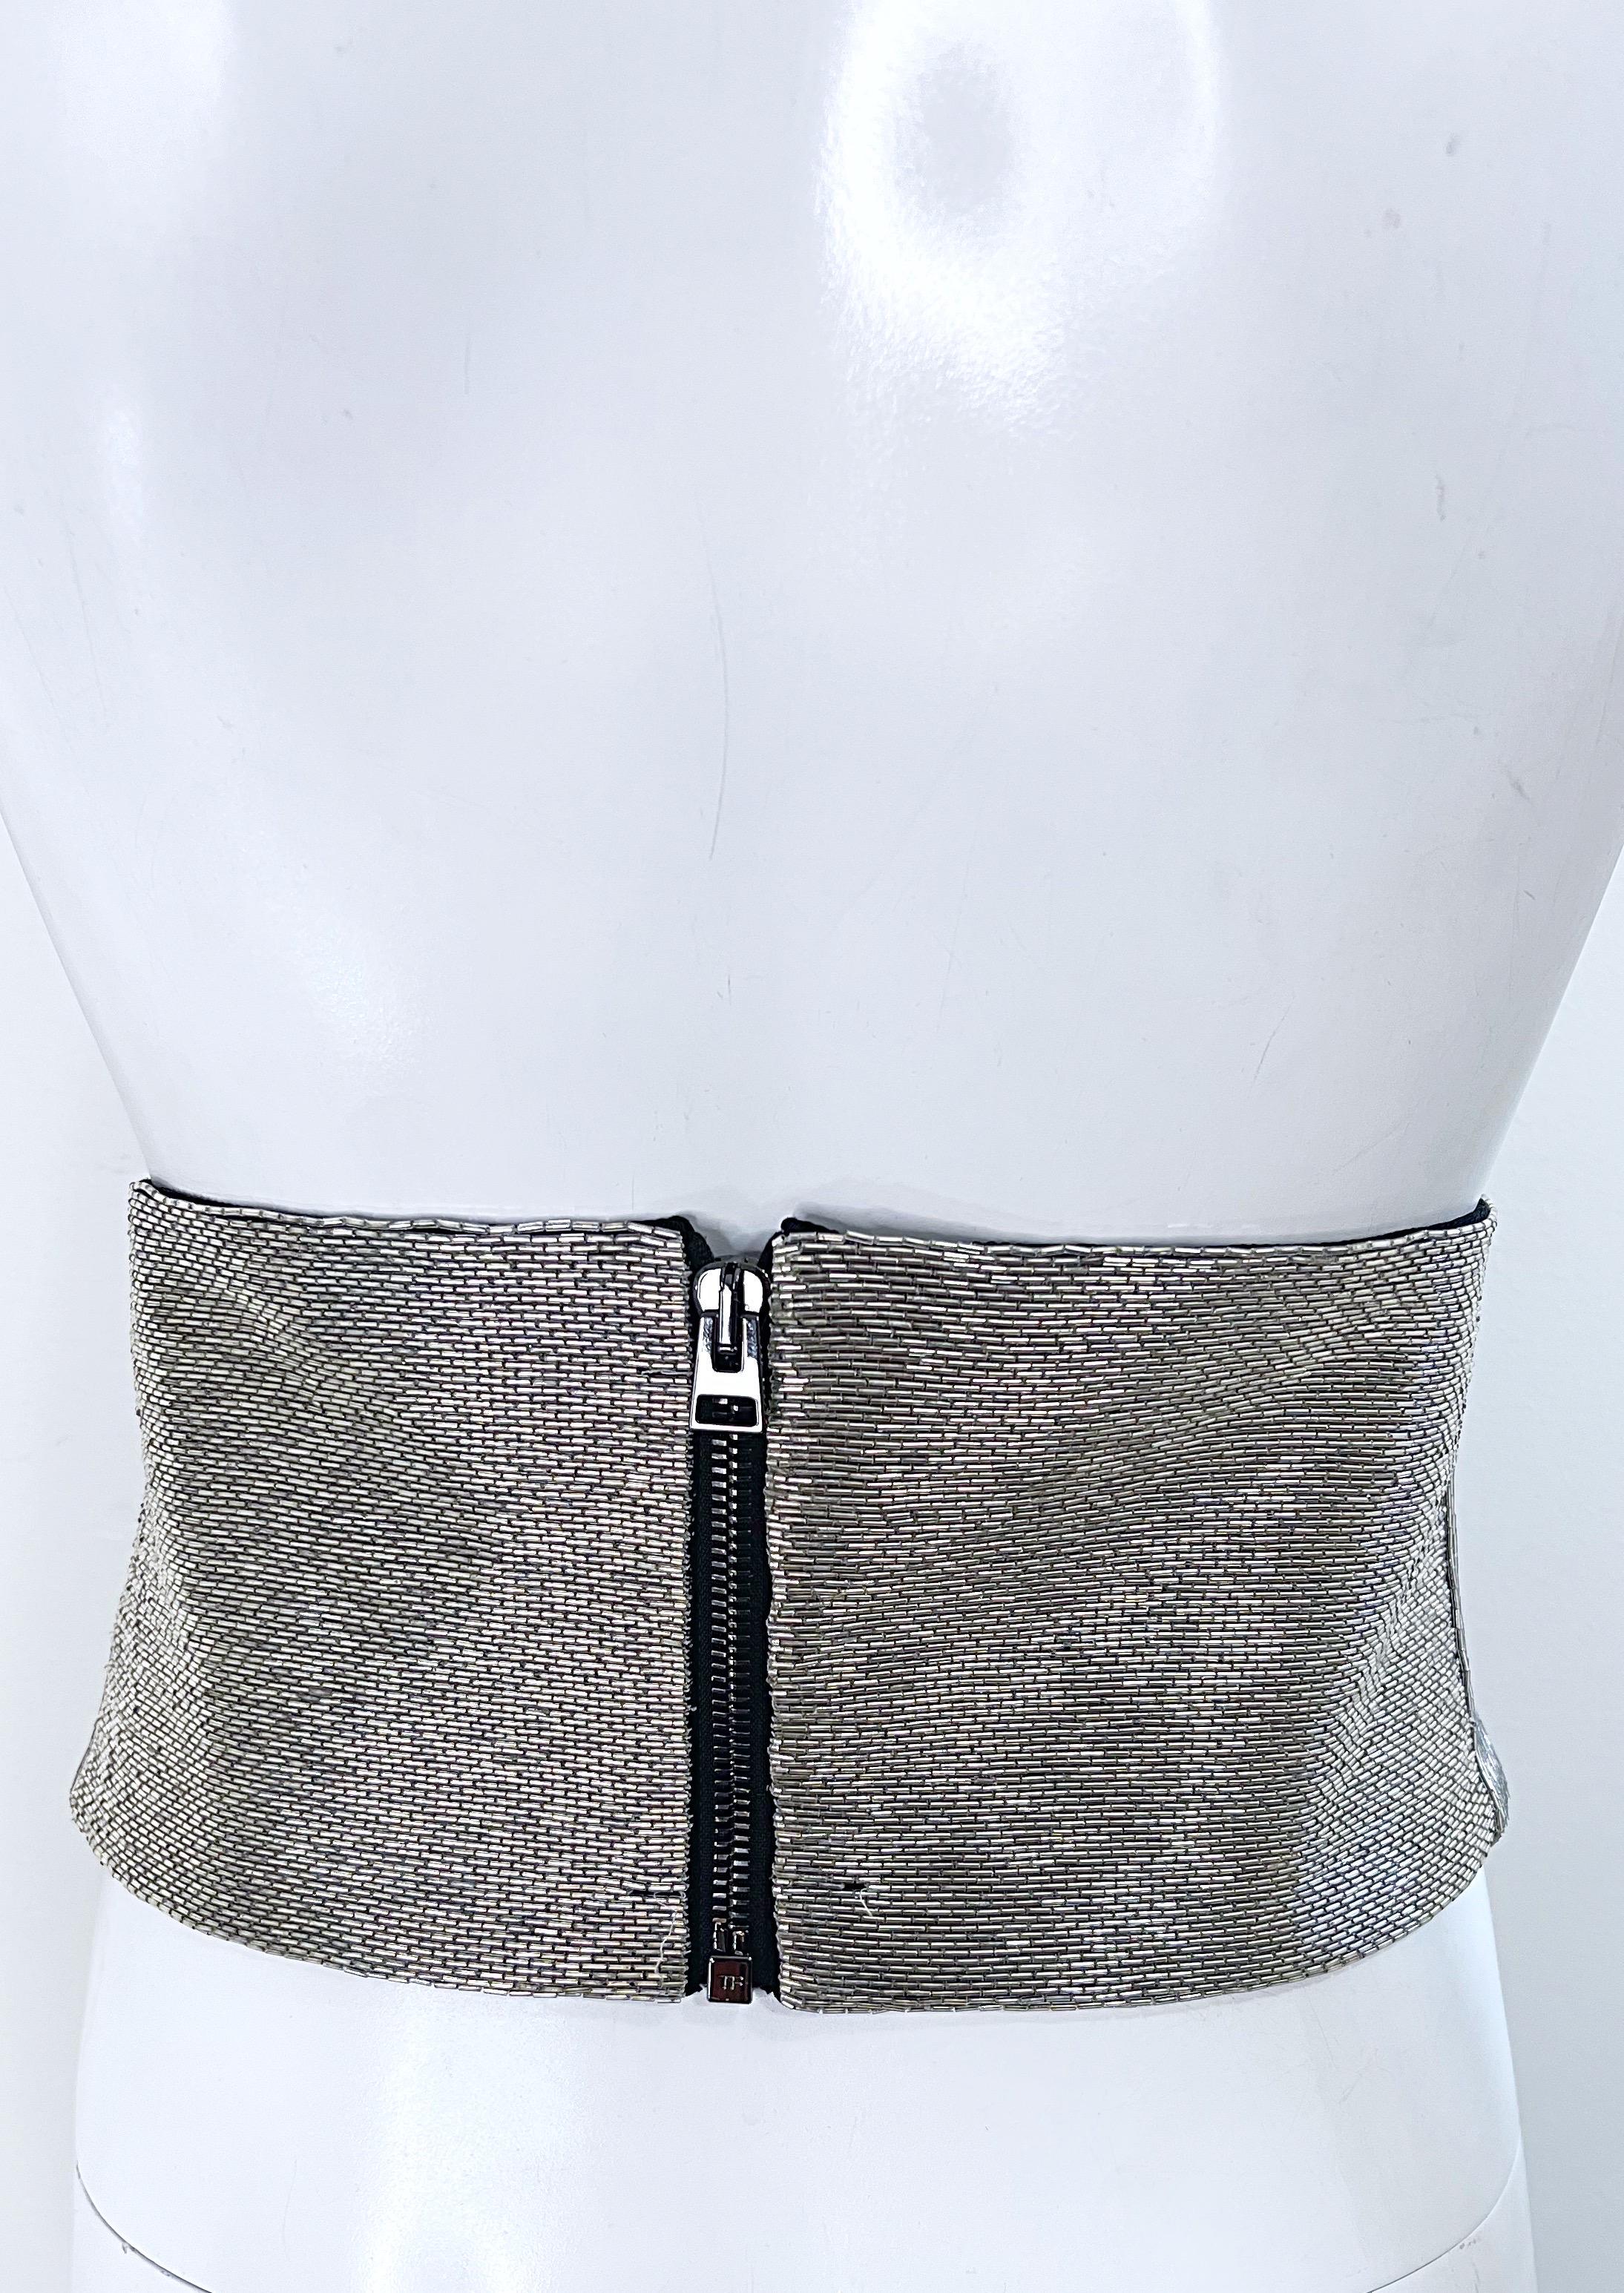 NWT Tom Ford Size 44 / 10 Silver Beaded Metallic Wide Silk Belt 31 Inch Waist In Excellent Condition For Sale In San Diego, CA